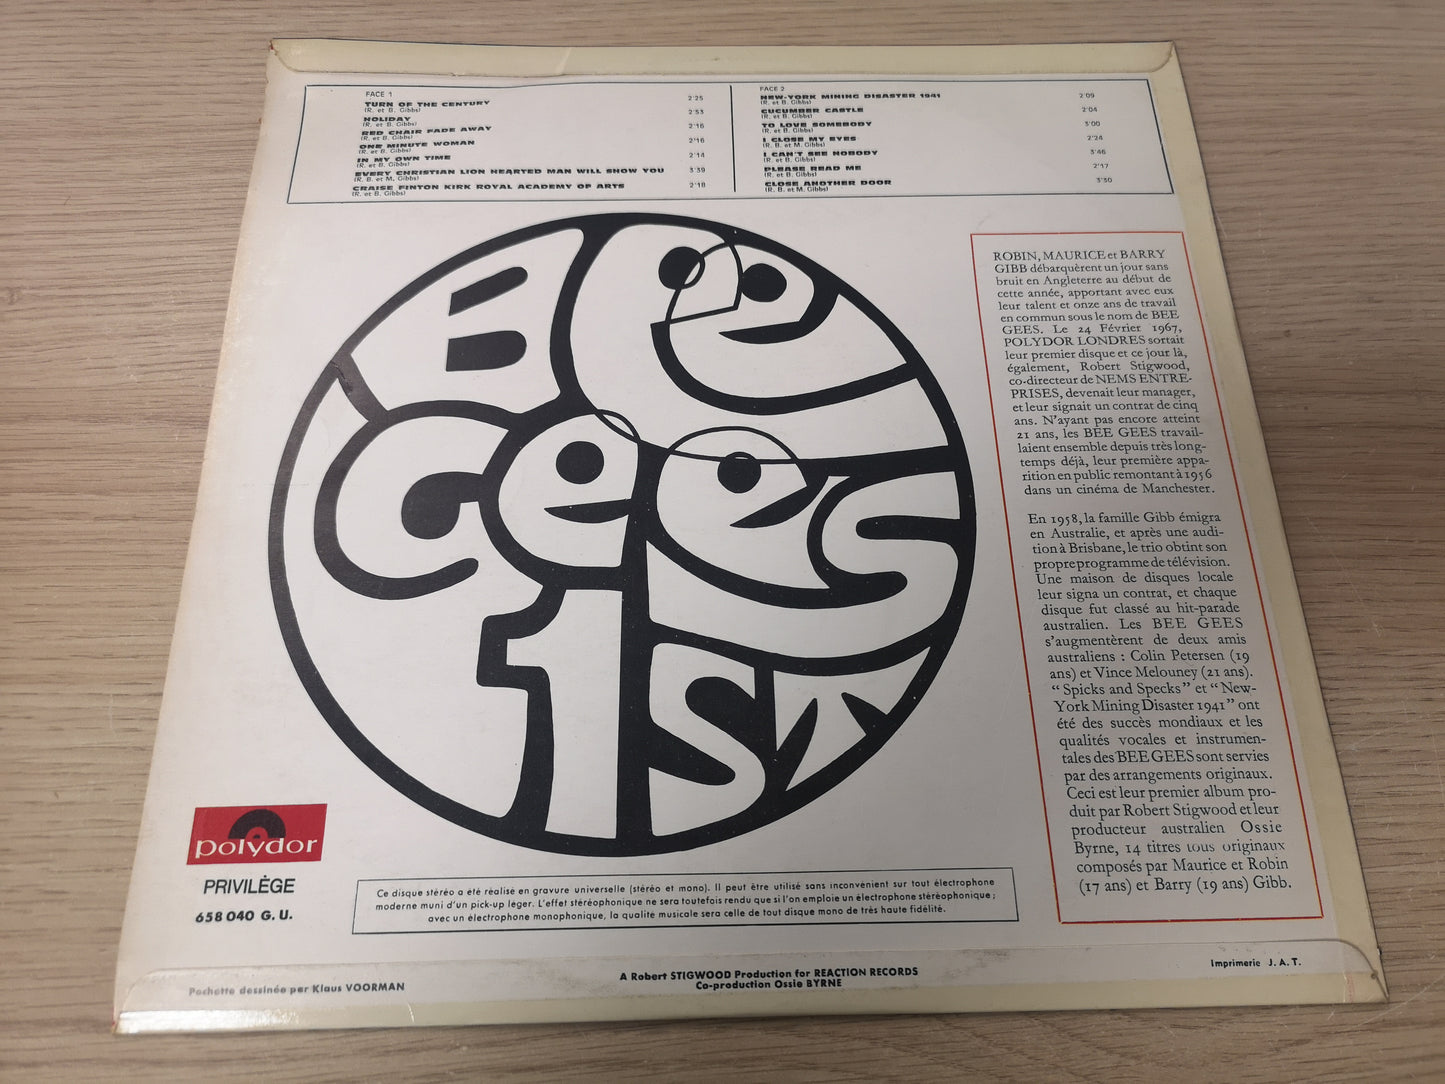 Bee Gees "1st" Orig France 1968 VG++/VG++ "Holiday"